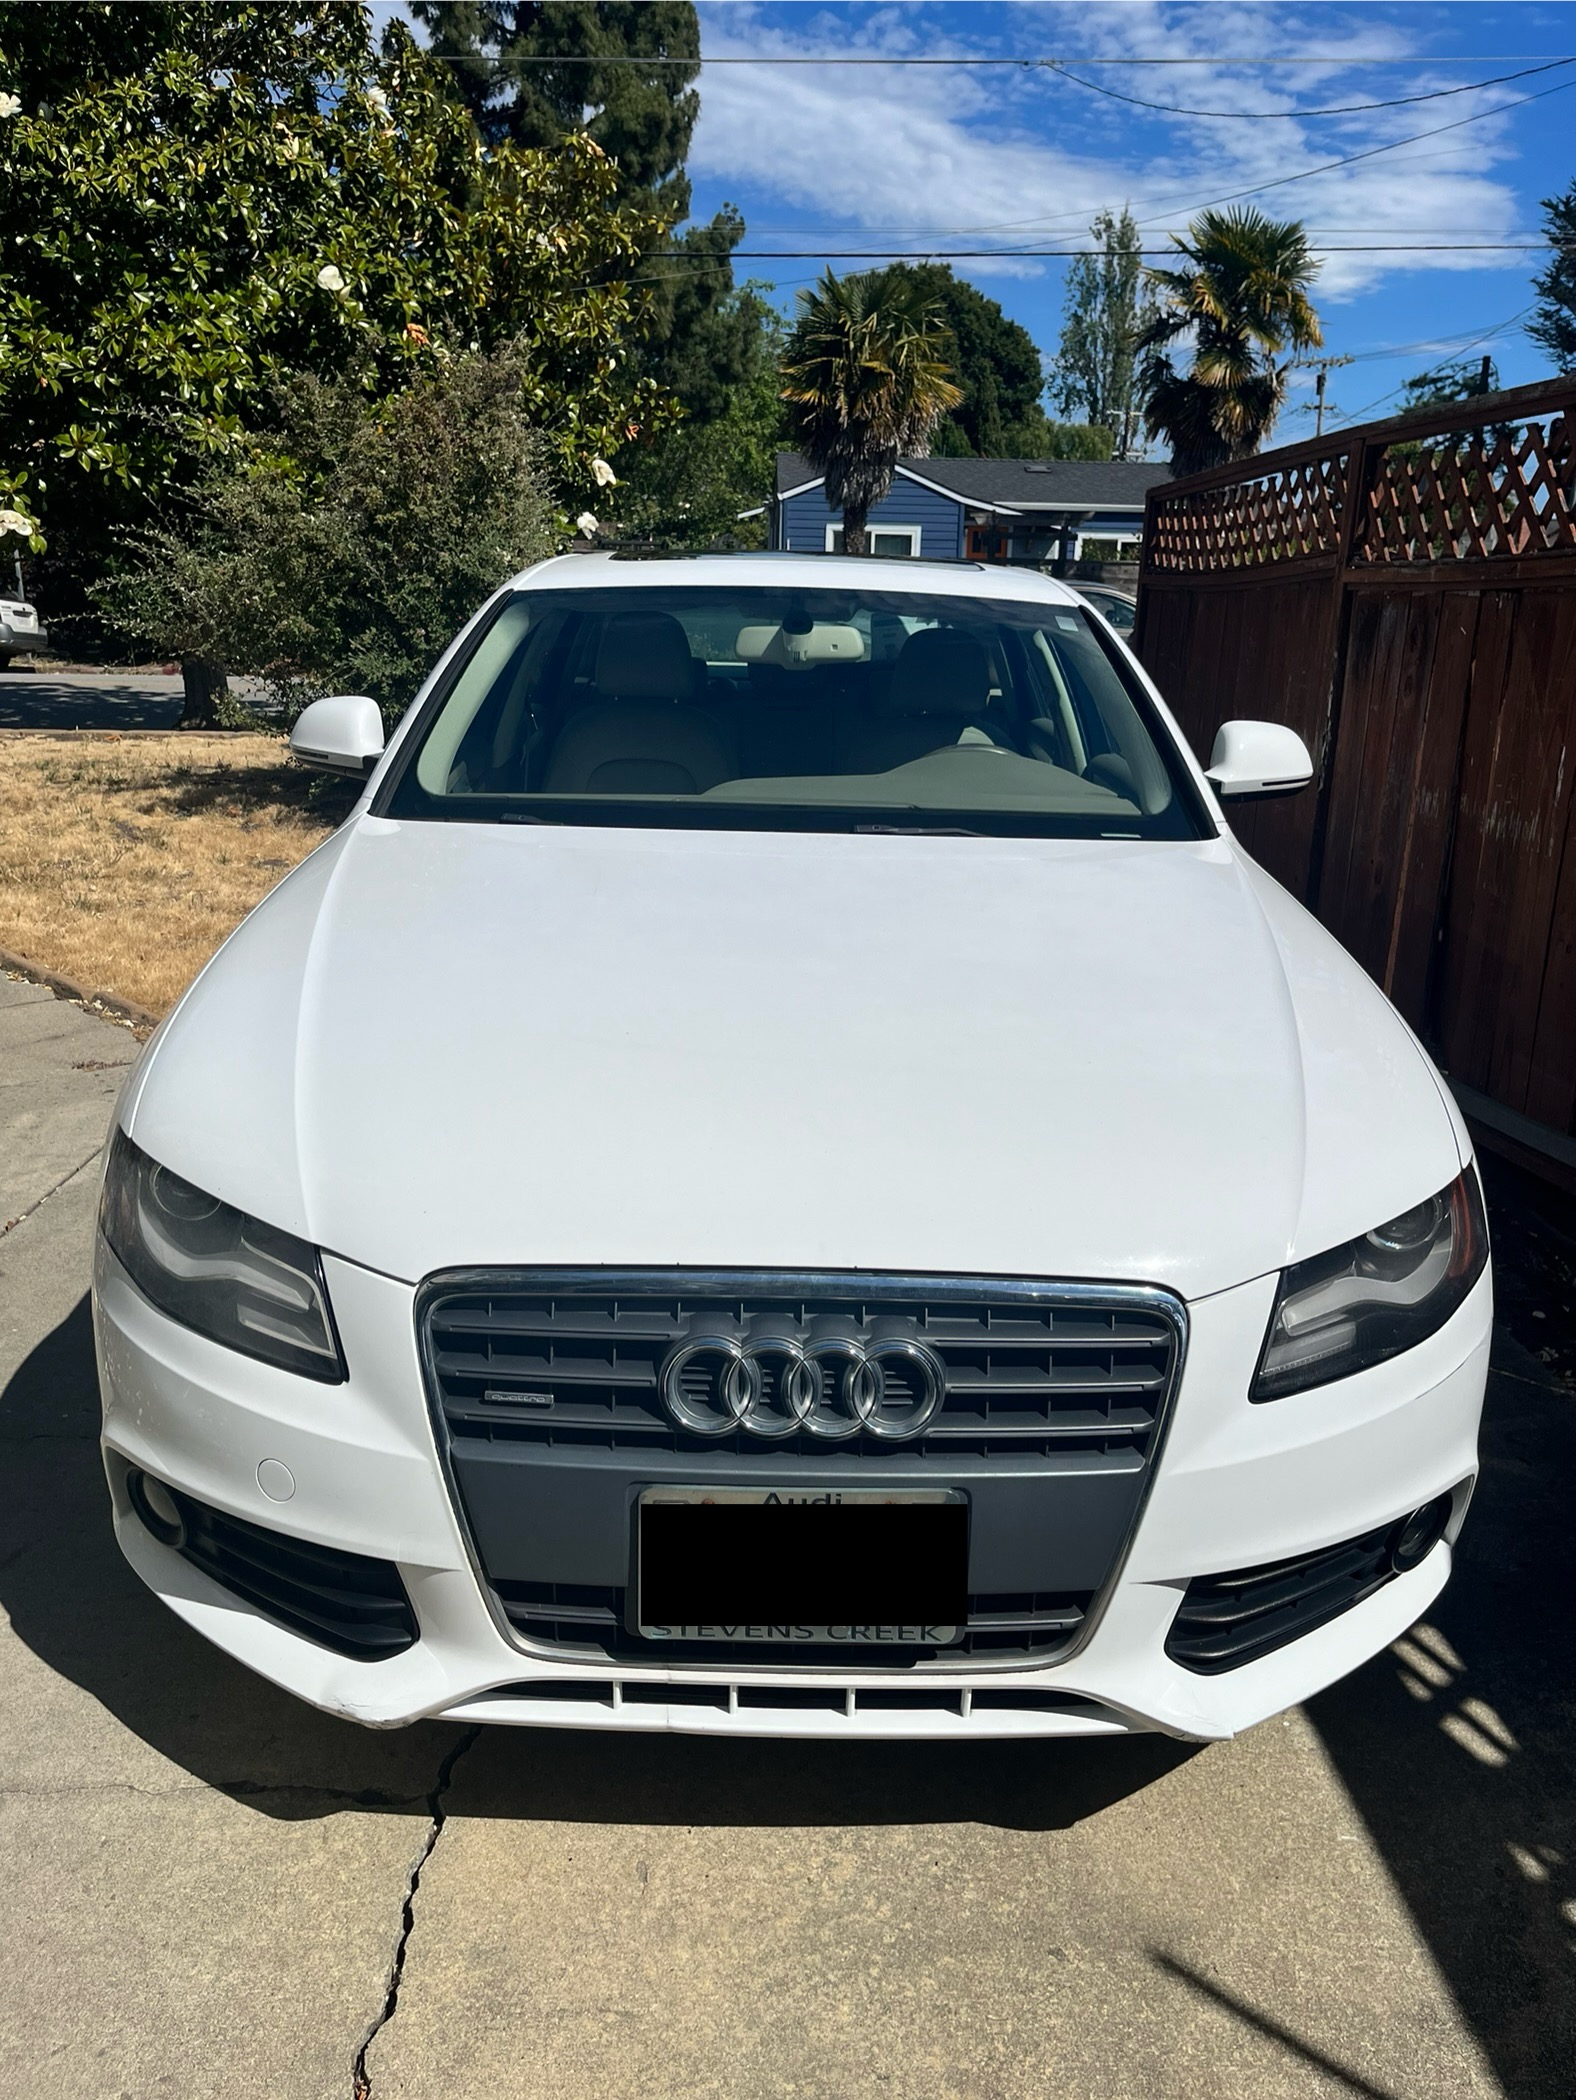 Used Audi A4 for Sale Under $8